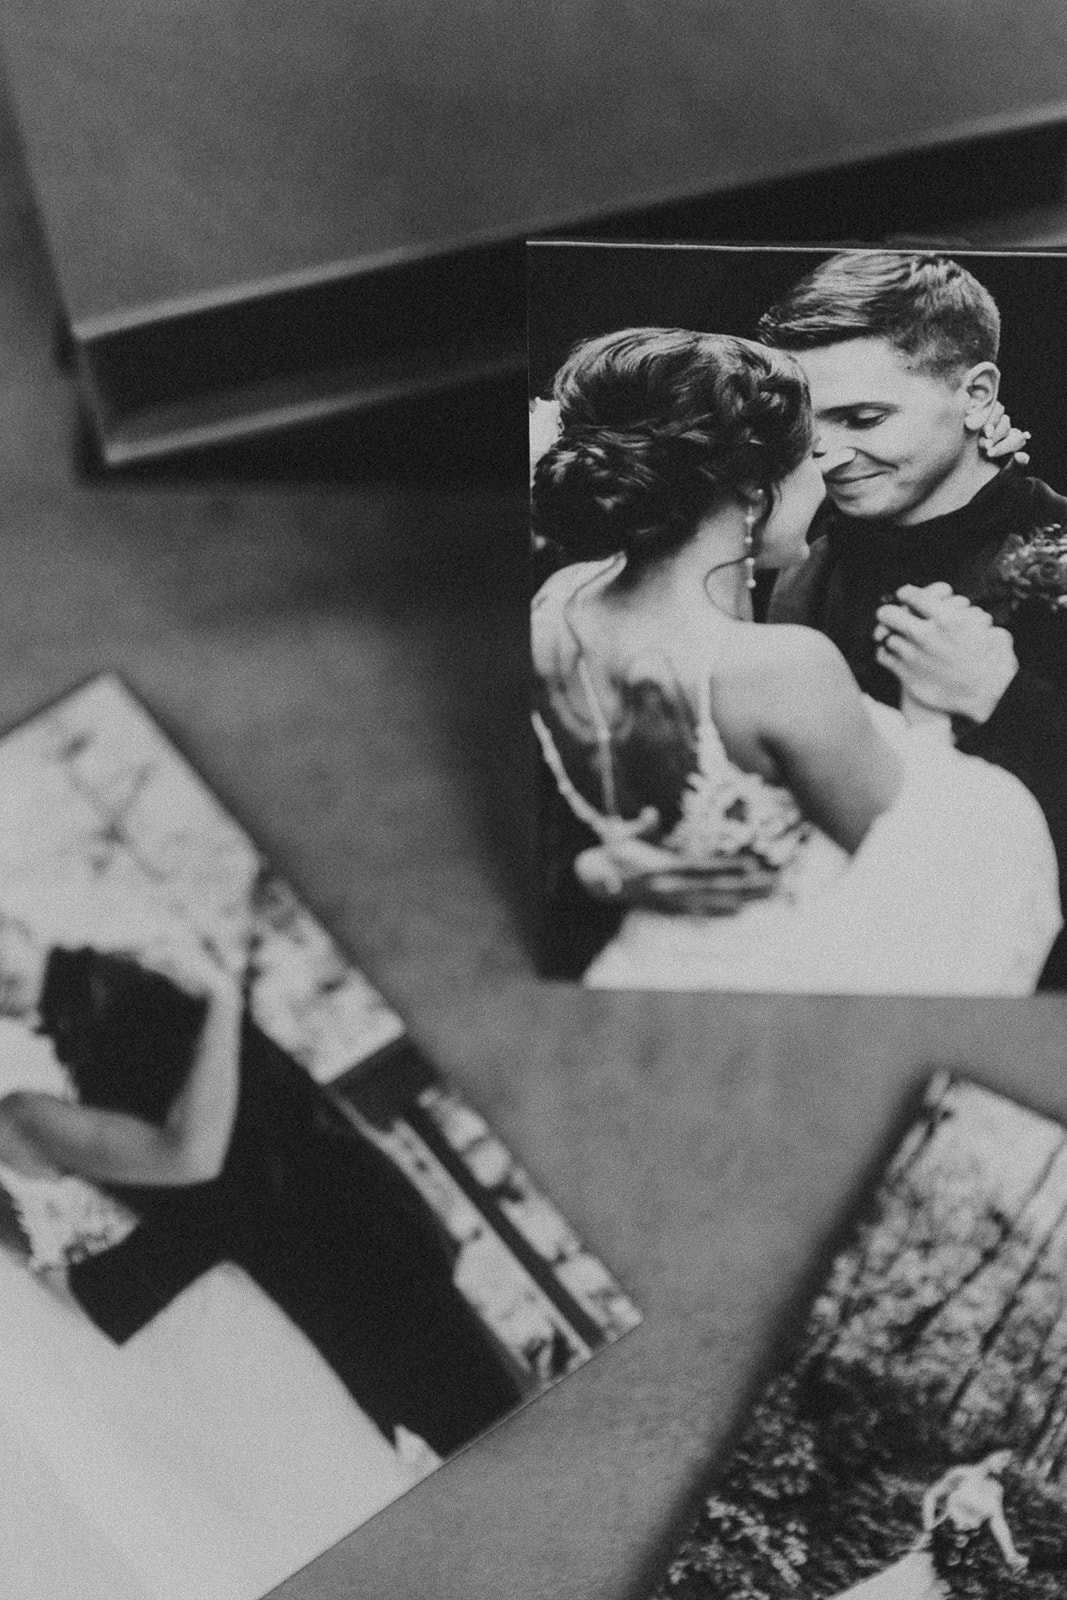 a Wedding keepsake with Three wedding photos featuring a bride and groom displayed on a gray surface, with a focus on tender, intimate moments 